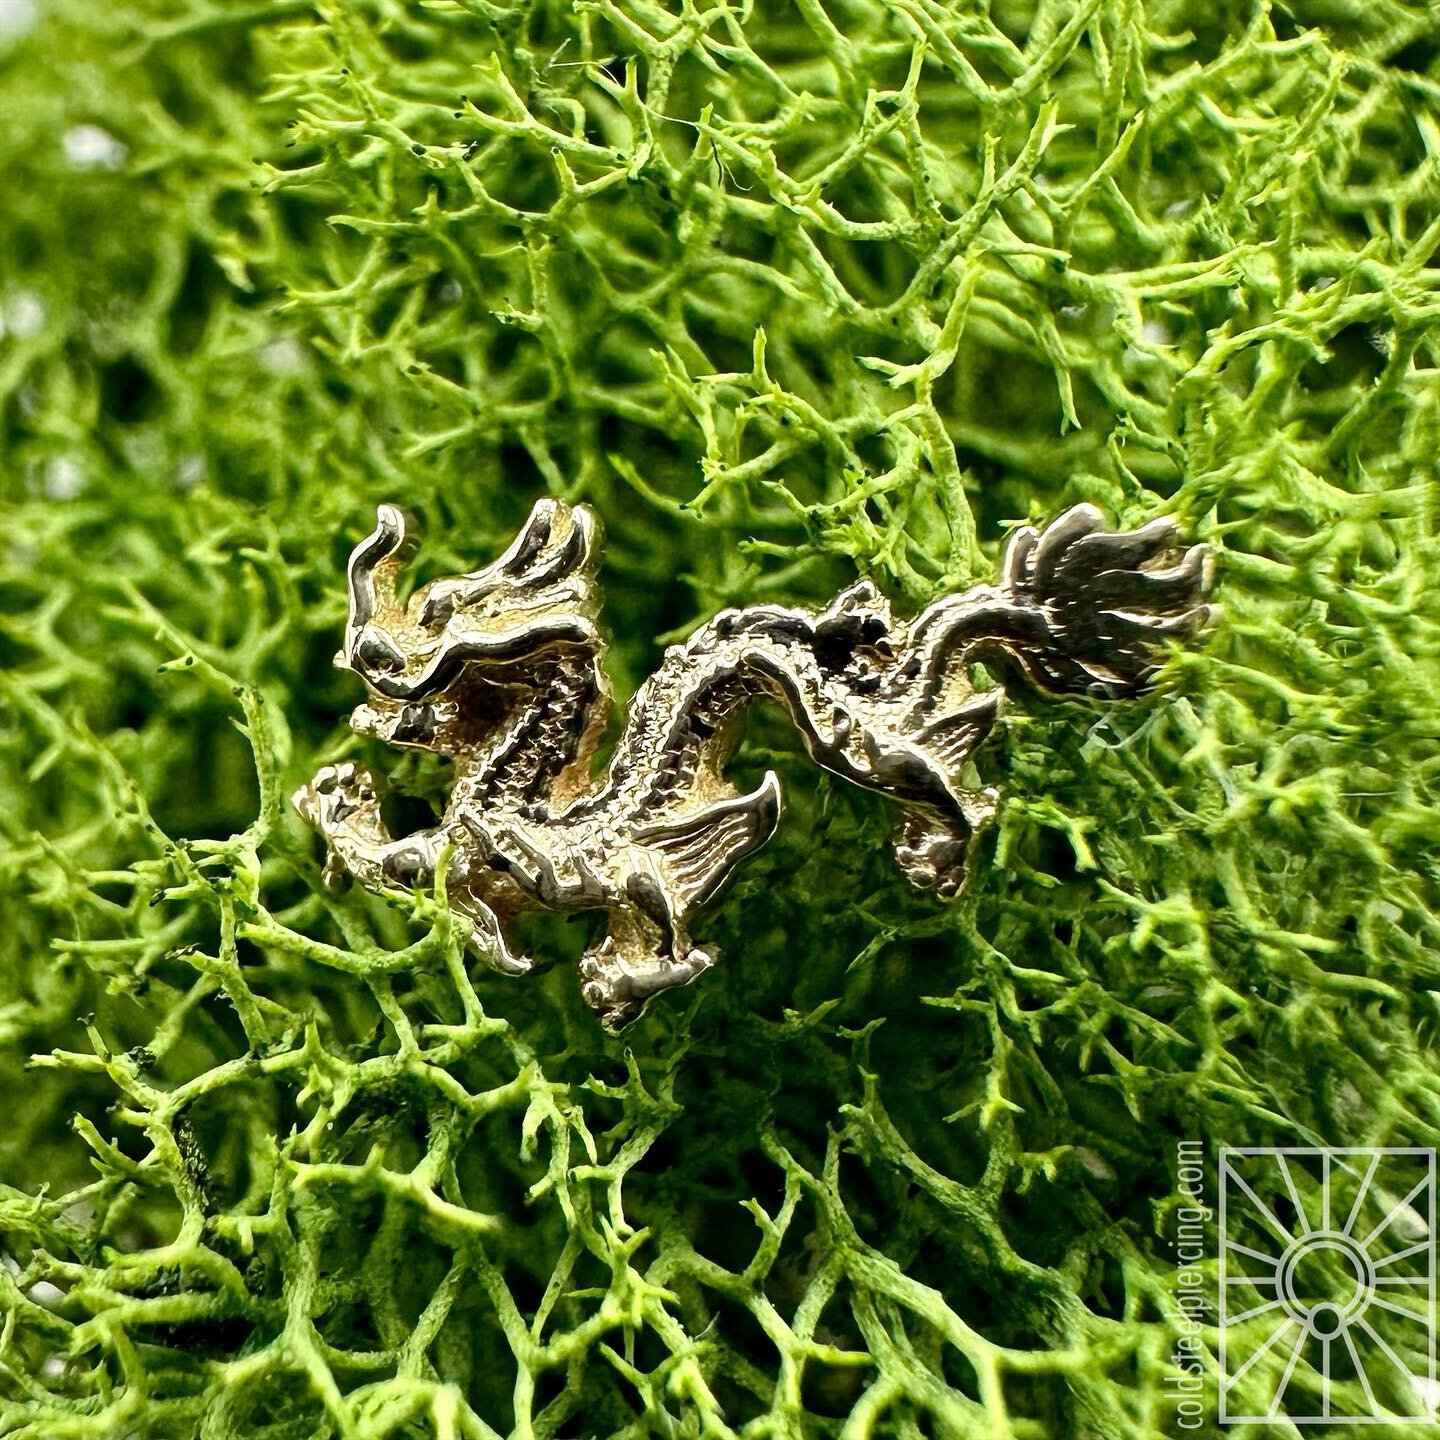 Who is this little wiggly guy? A yellow gold threaded &ldquo;Mini Fei Long&rdquo; end from BVLA! 🐉✨
-----------------------------
Follow us!
Facebook.com/coldsteelamerica
Instagram @coldsteelpiercing
Coldsteelpiercing.com
Coldsteelusa@gmail.com
----